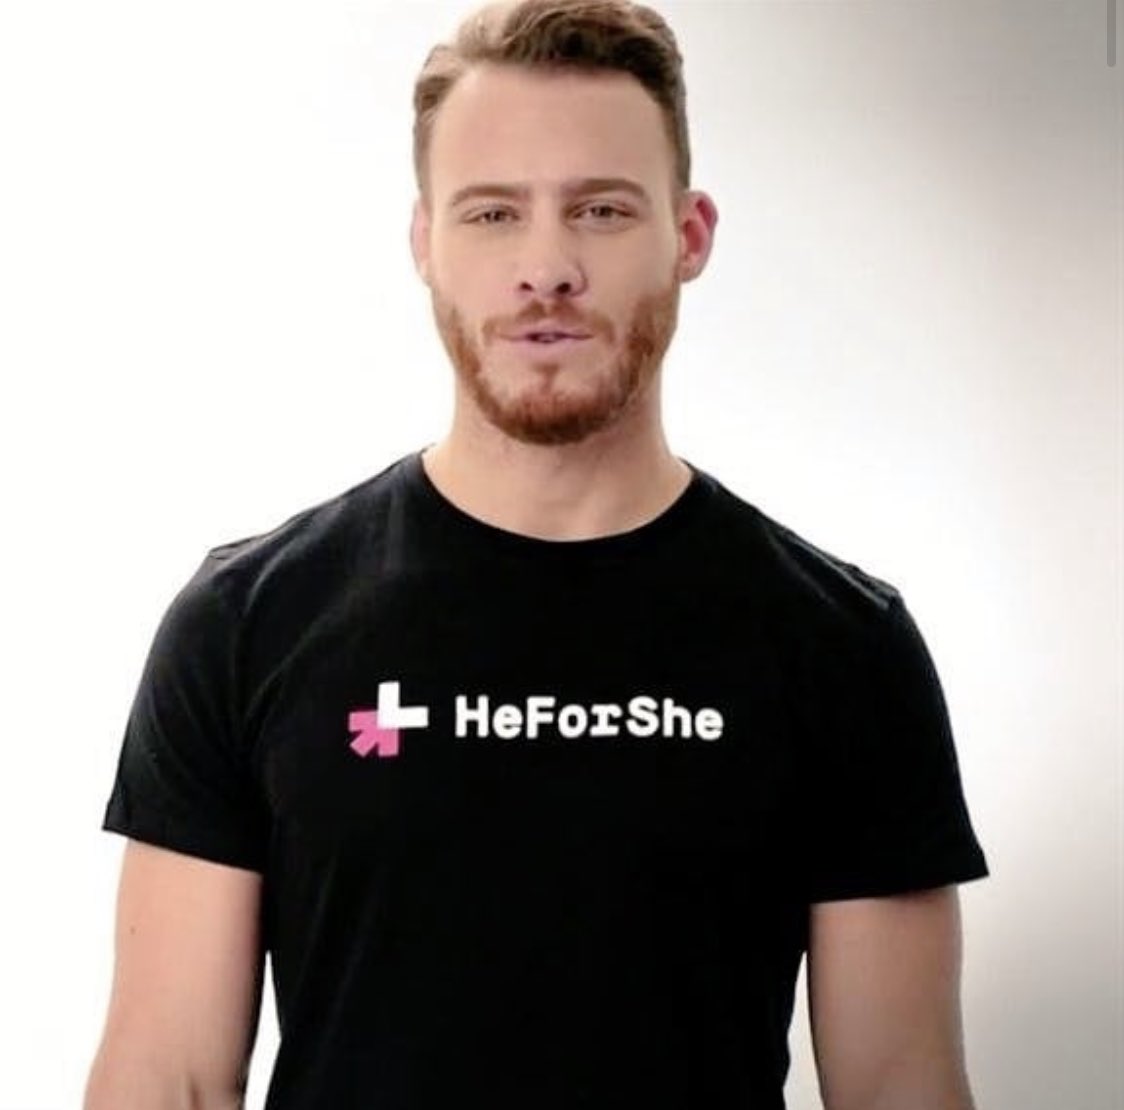 5. he is a part of the campaign  #heforshe  